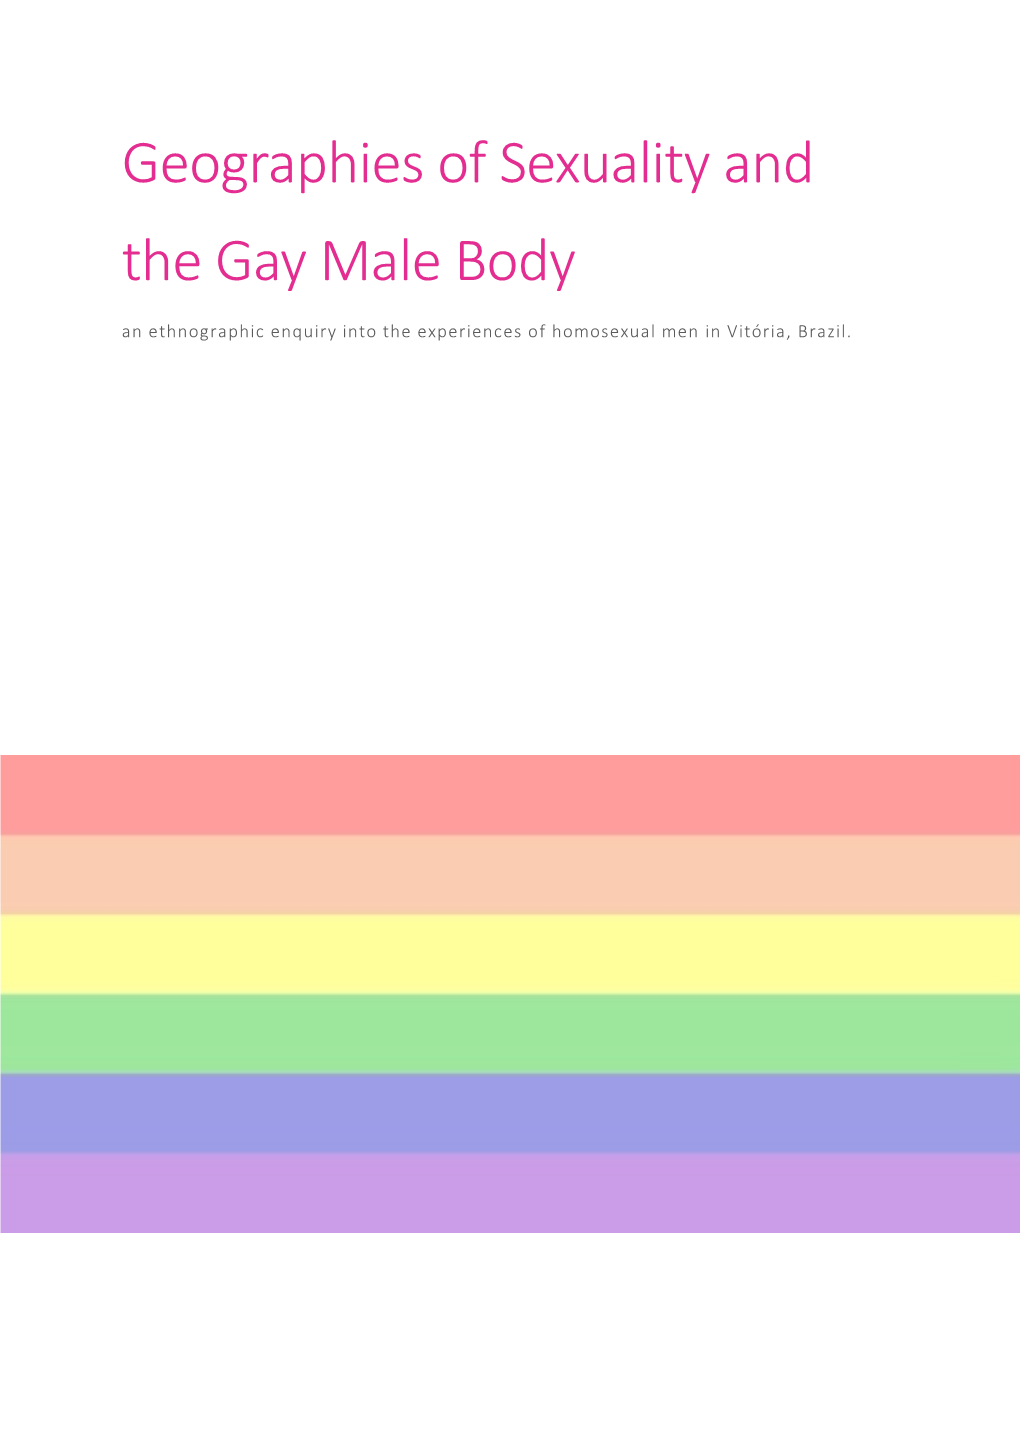 Geographies of Sexuality and the Gay Male Body an Ethnographic Enquiry Into the Experiences of Homosexual Men in Vitória, Brazil